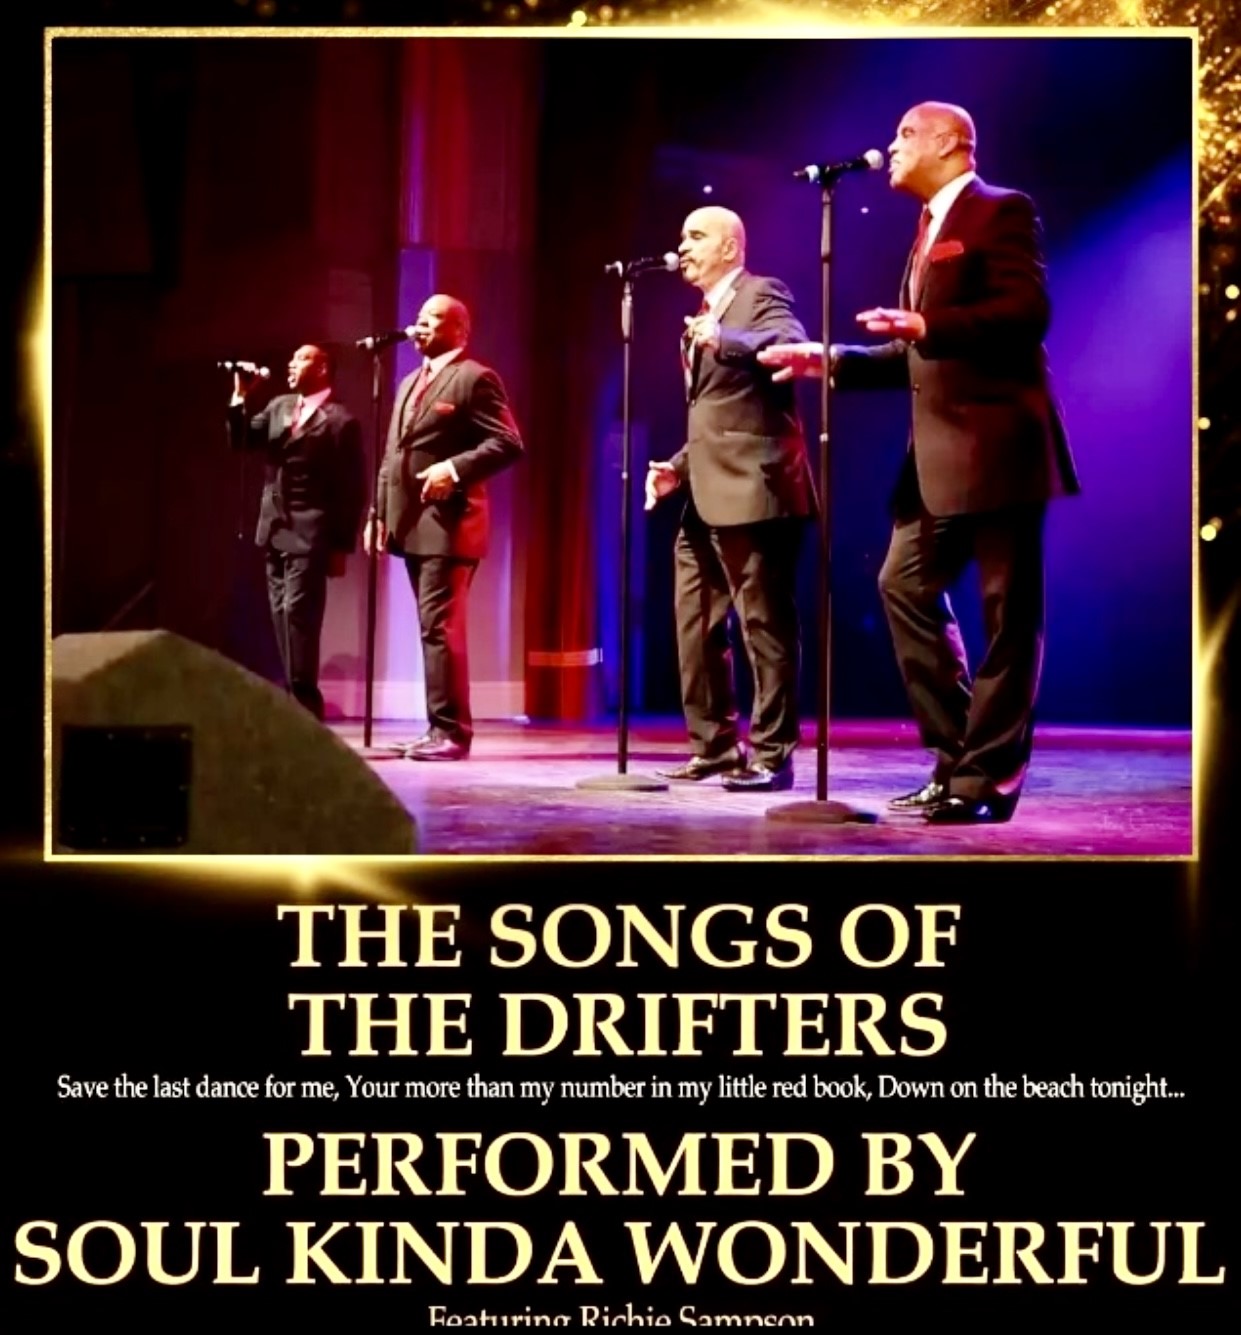 The Songs of The DRIFTERS & MORE performed by Soul Kinda Wonderful featuring Richie Sampson, formerly in The Drifters  on may. 04, 20:00@Peel Centenary Centre - Compra entradas y obtén información enRS PROMOTIONS 